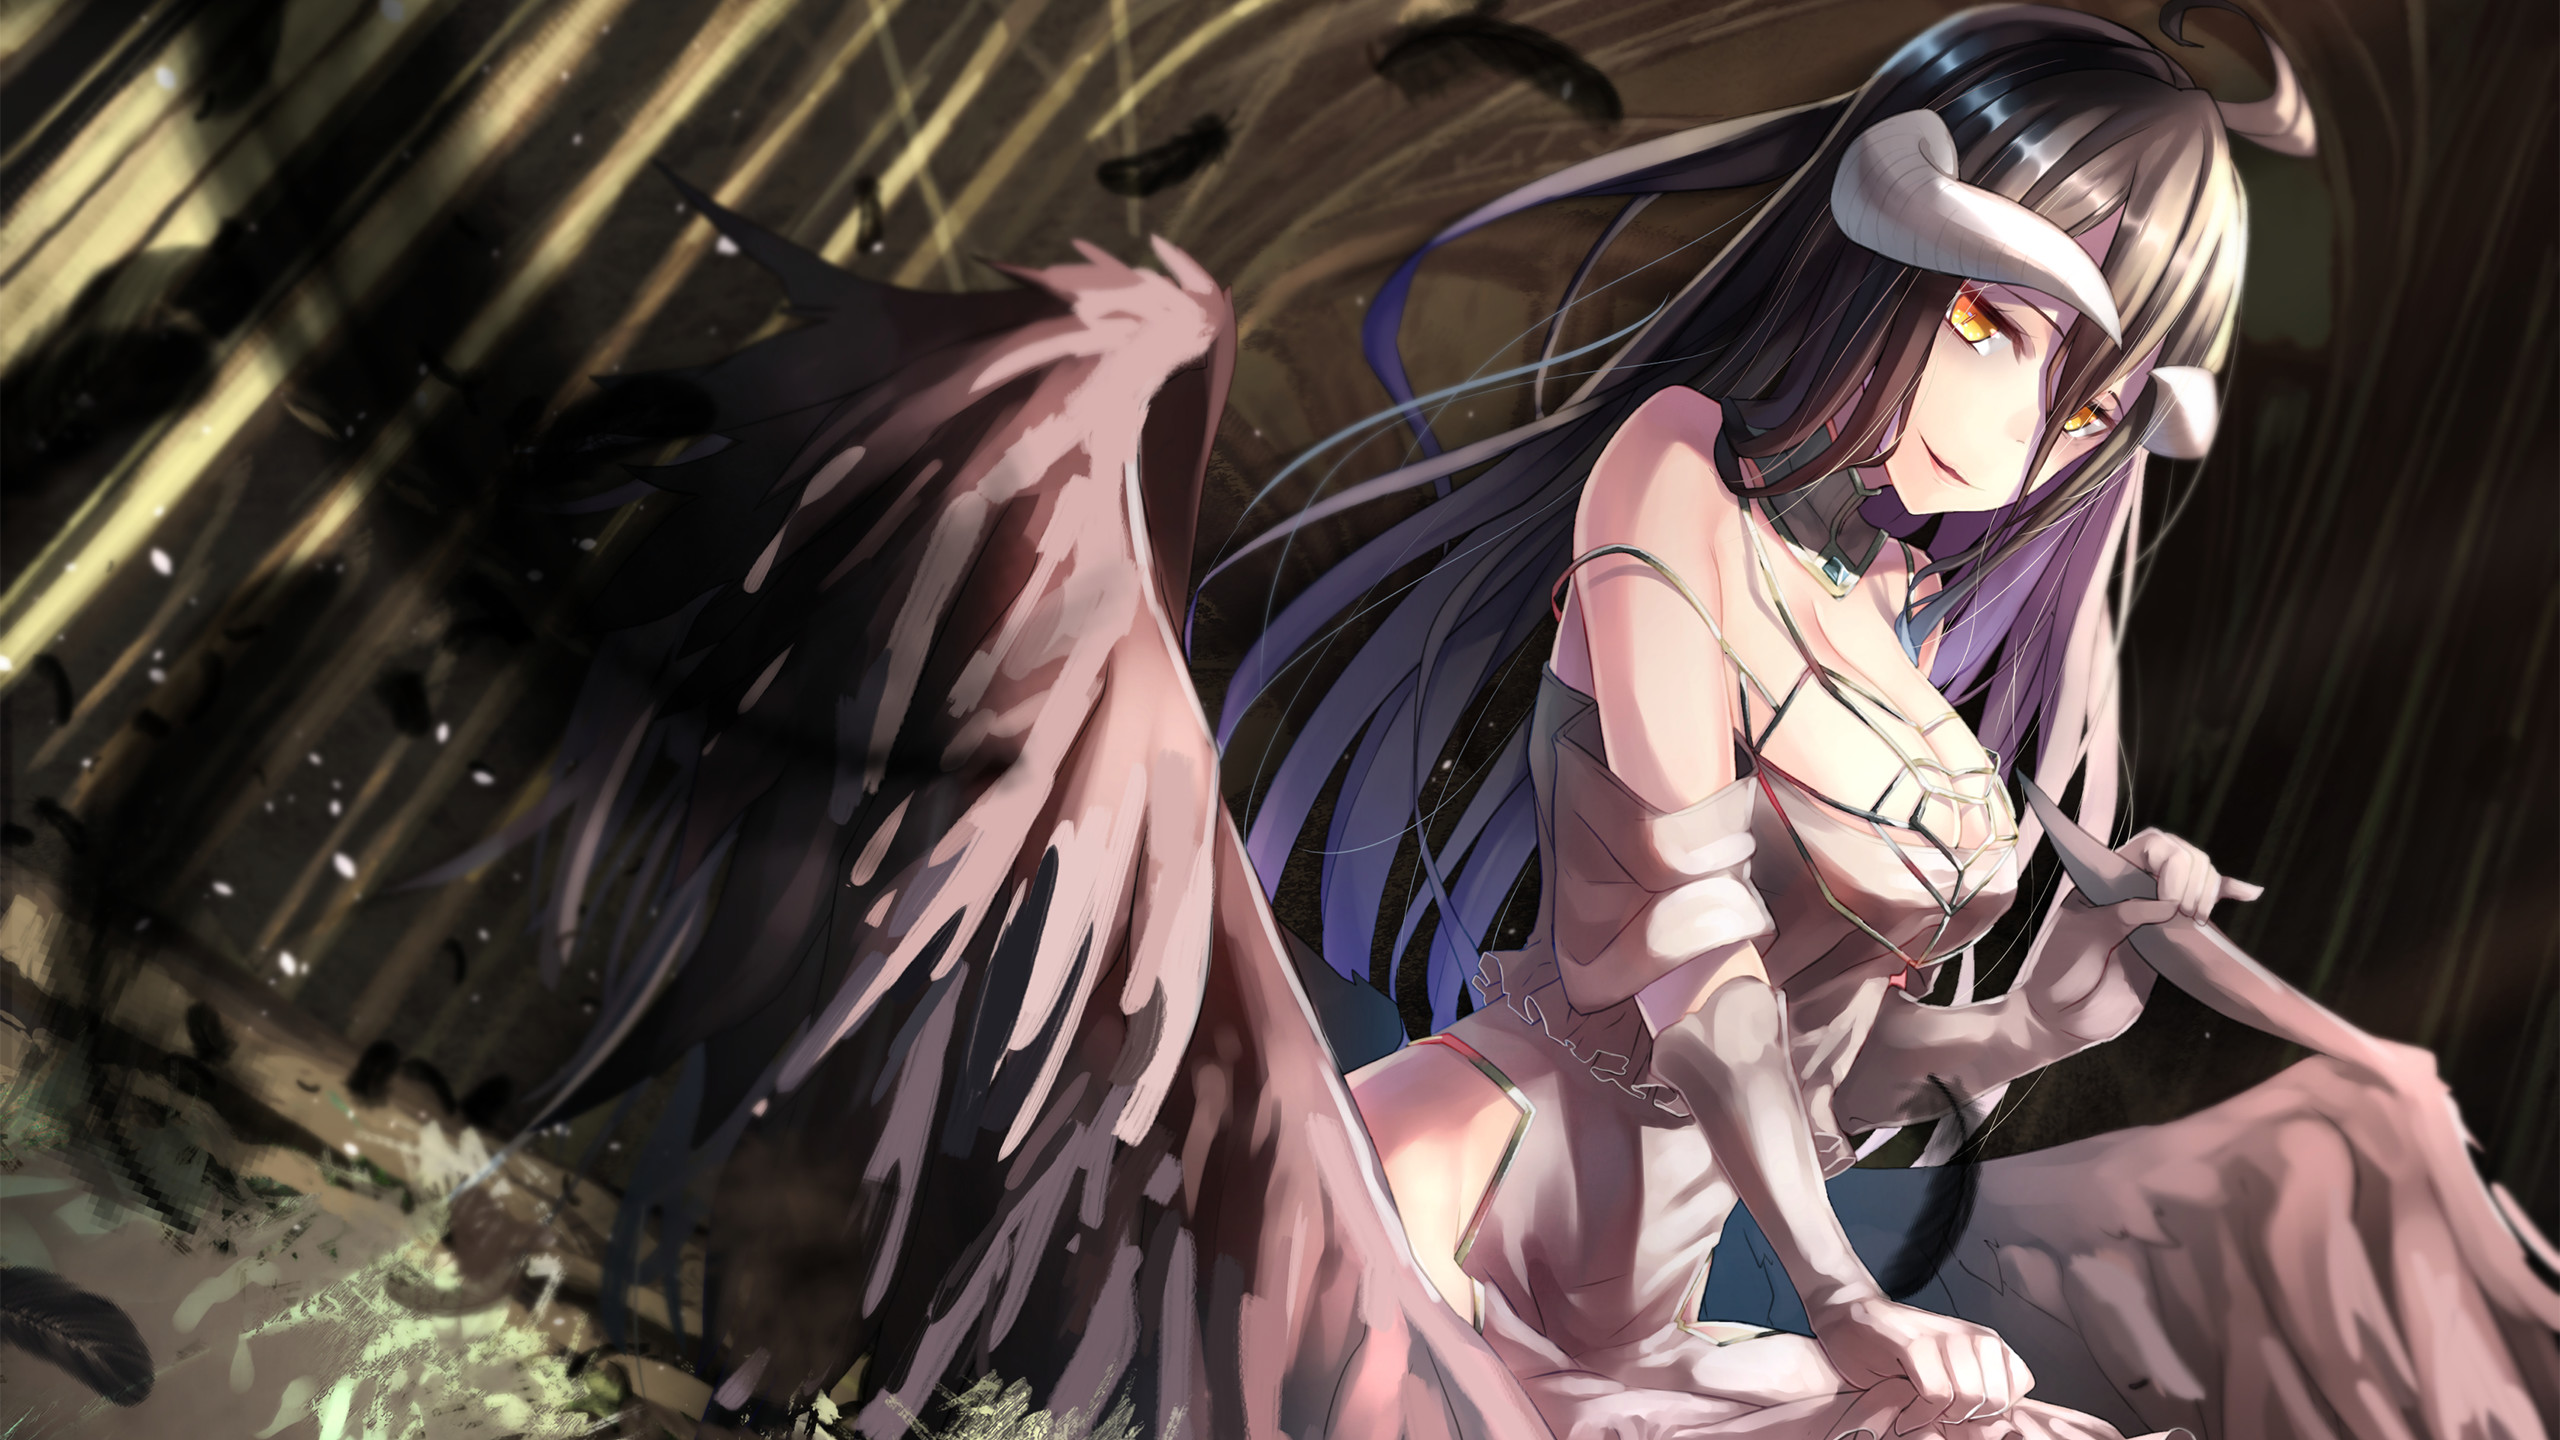 Overlord Anime Albedo Wallpaper (76+ images)